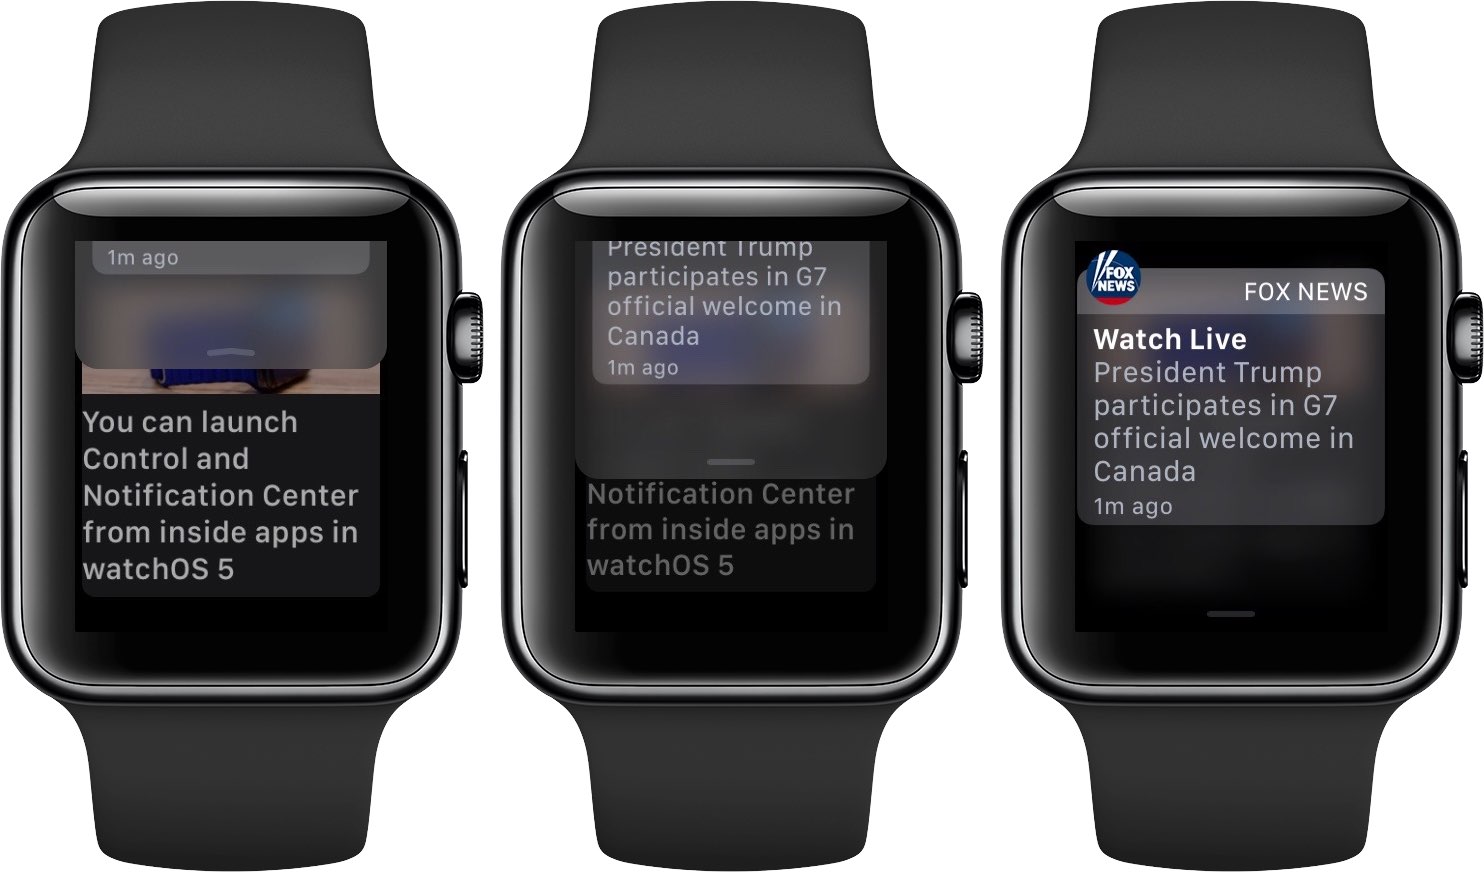 Opening Notification Center on Apple Watch while using the FoxNews app